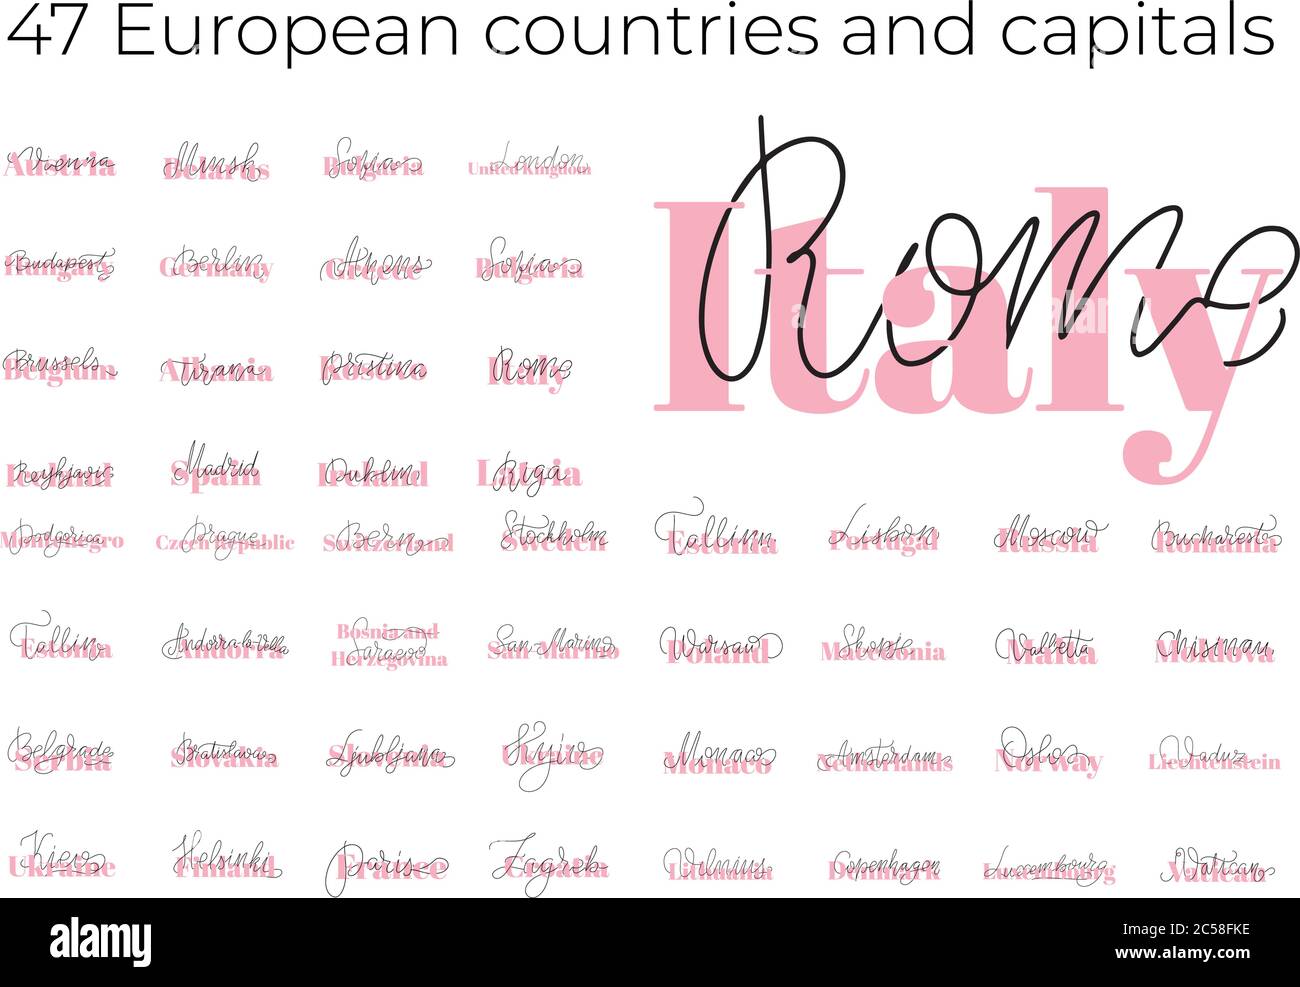 List of European countries and capitals names. Stock Vector